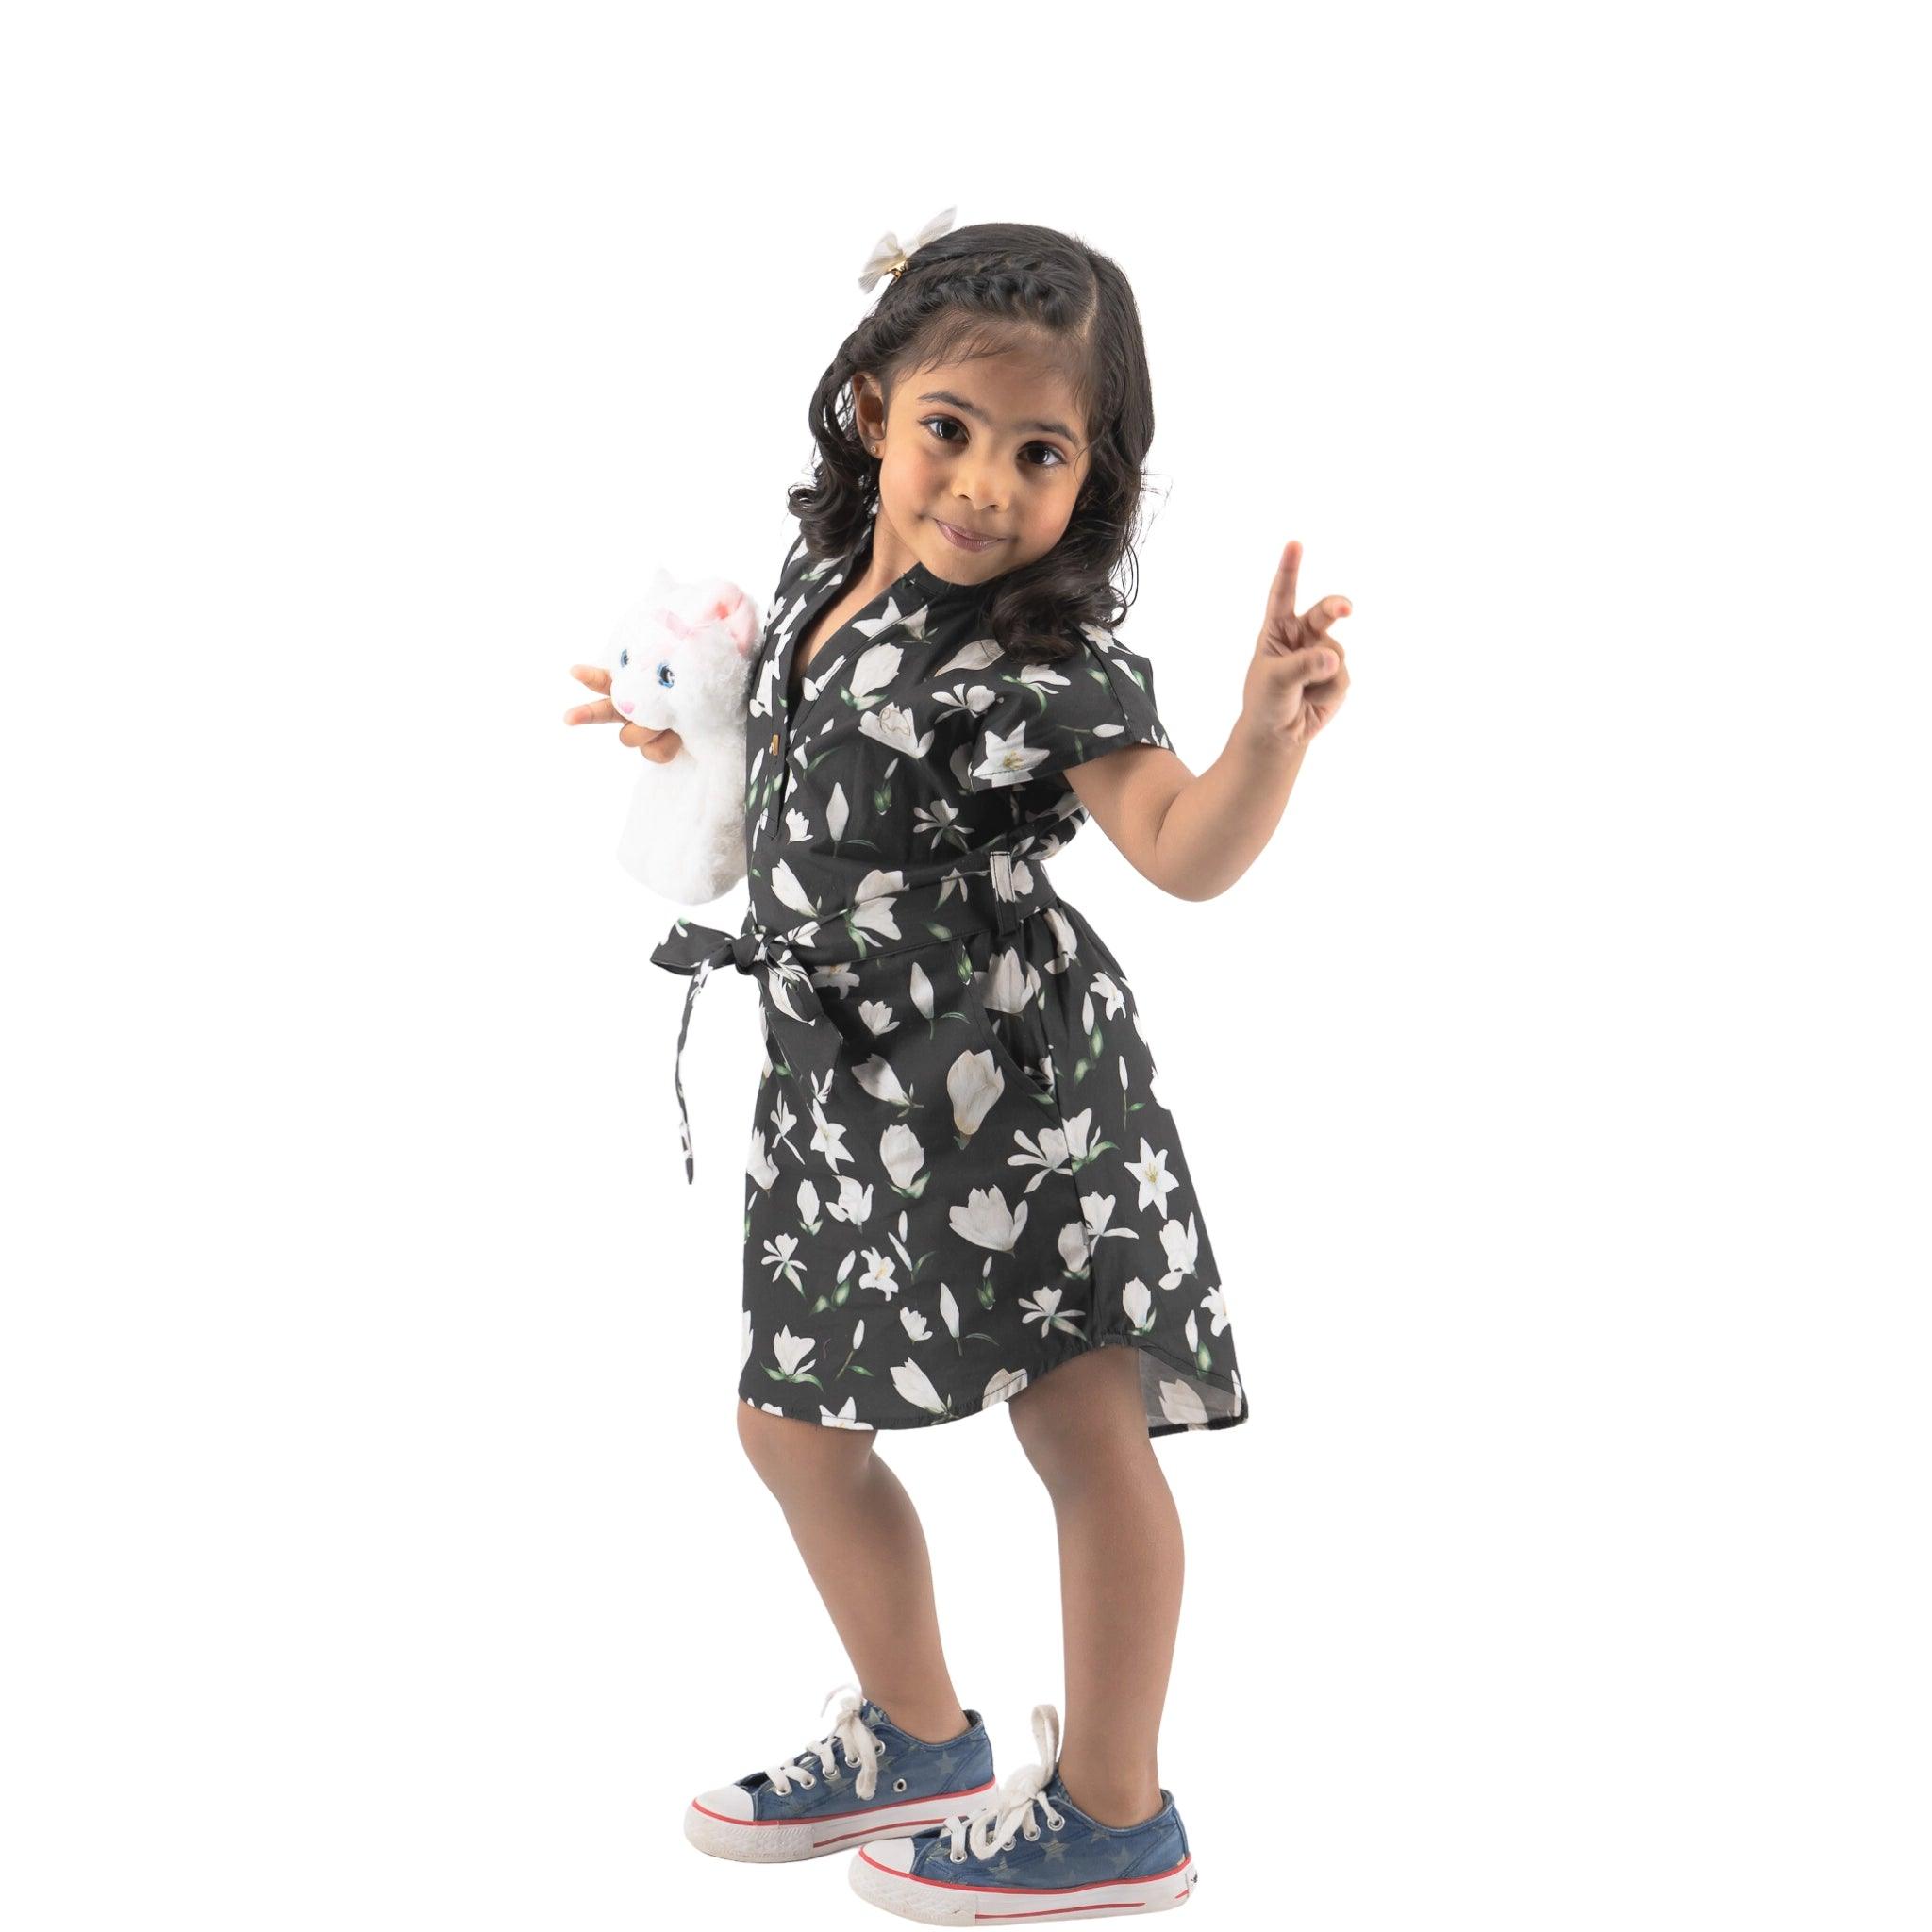 Young girl in a Black Lilly Blossom cotton shirt dress by Karee holding a stuffed animal and making a peace sign, isolated on a white background.